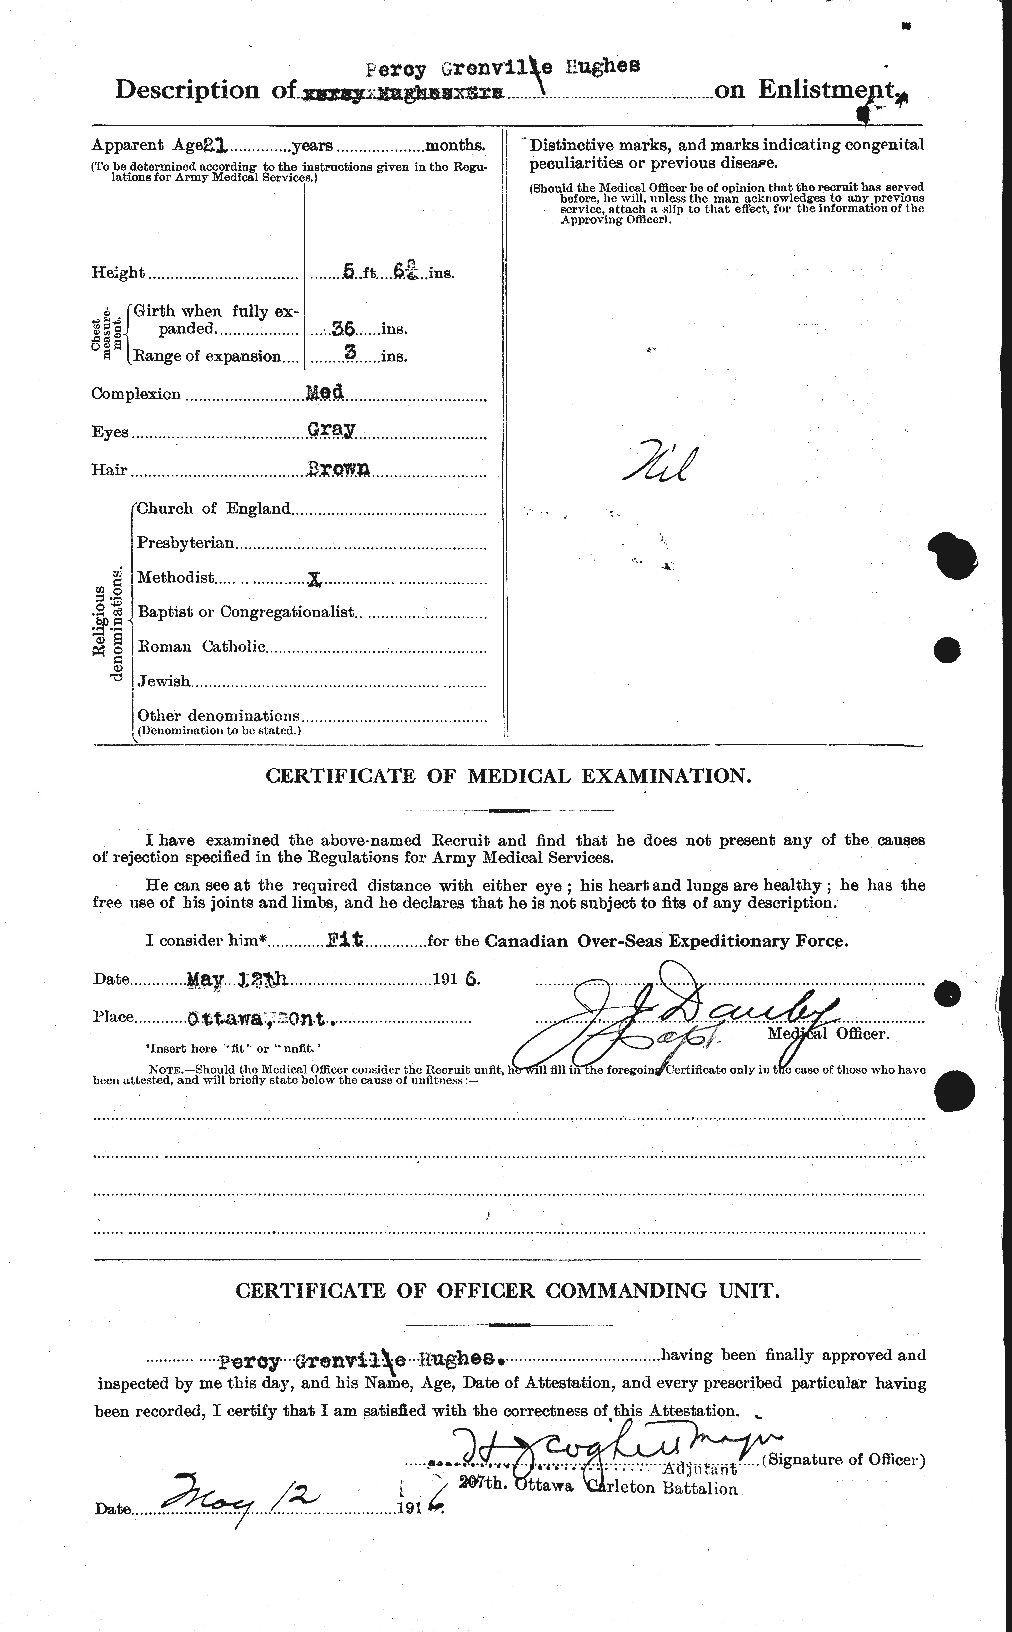 Personnel Records of the First World War - CEF 404159b